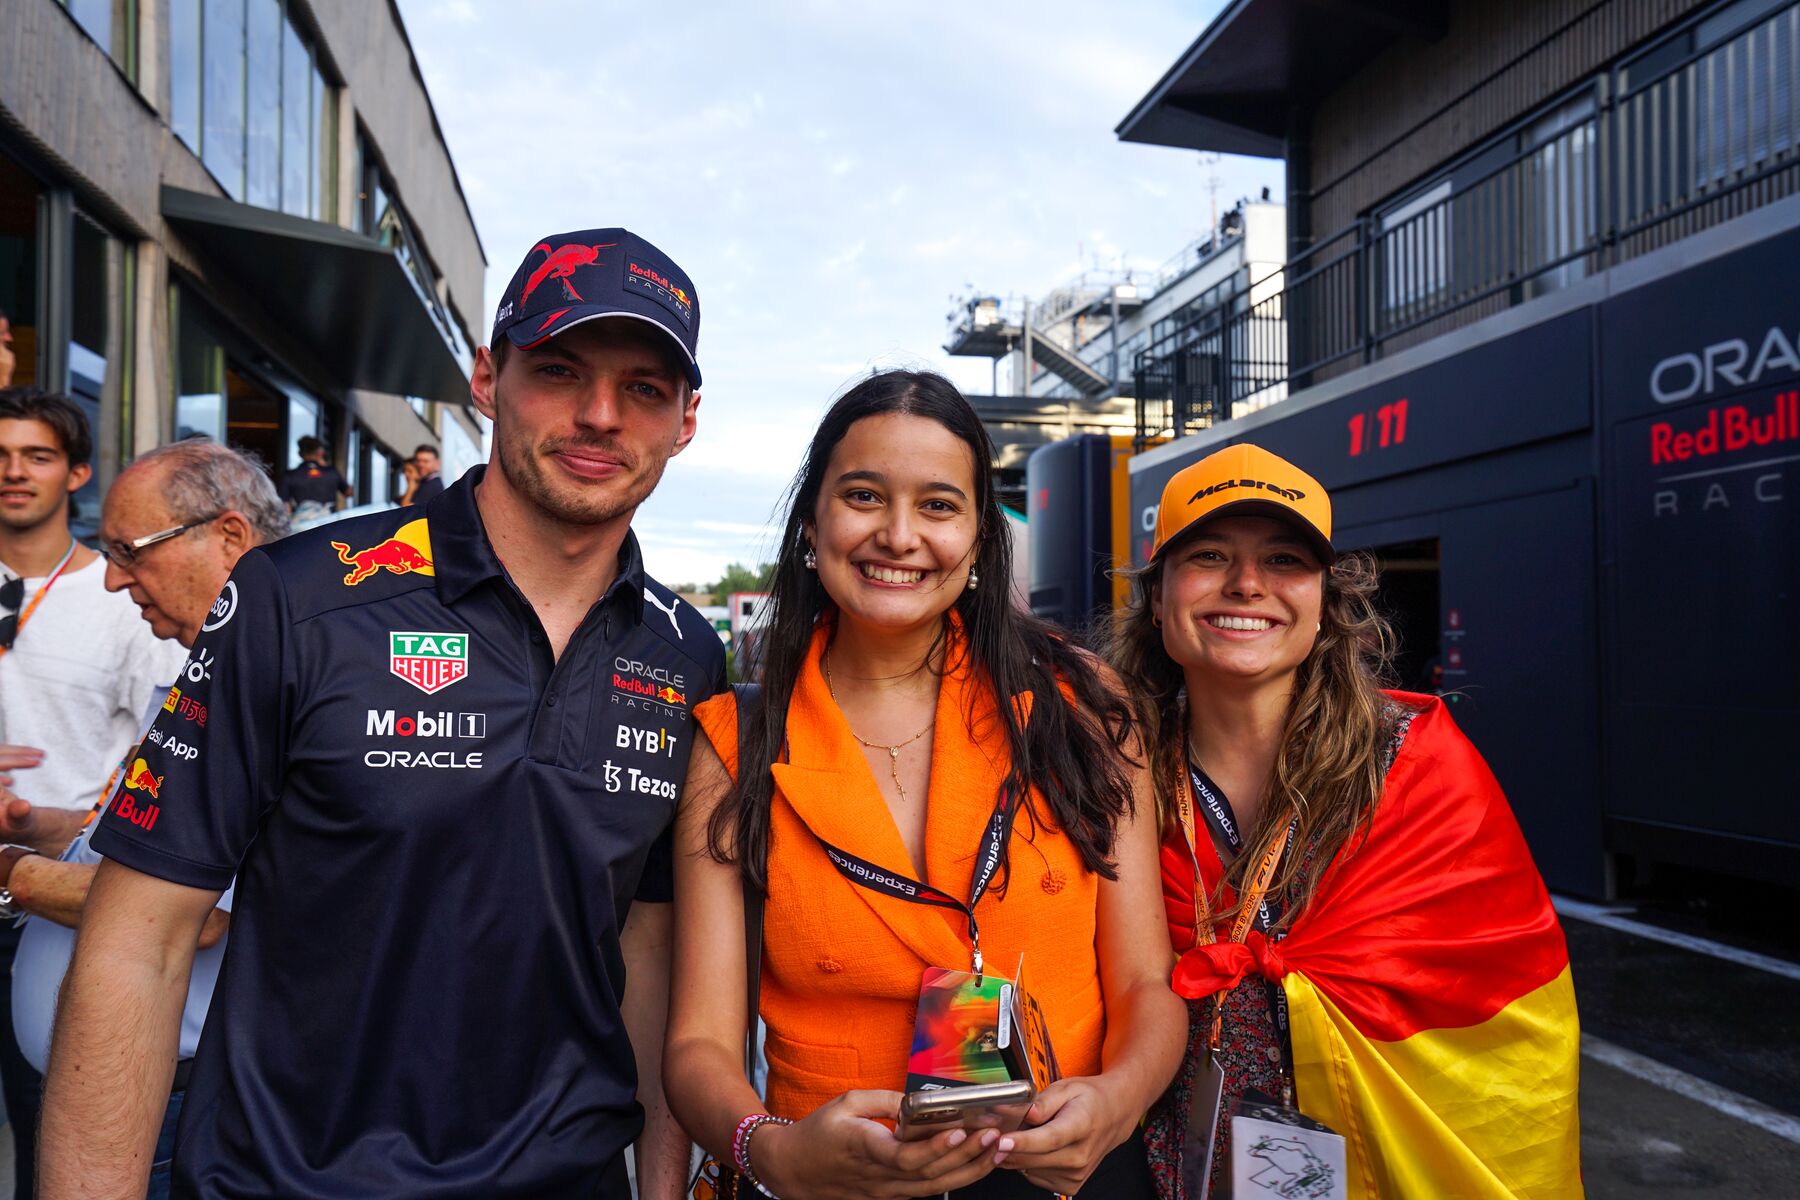 Max with F1 fans